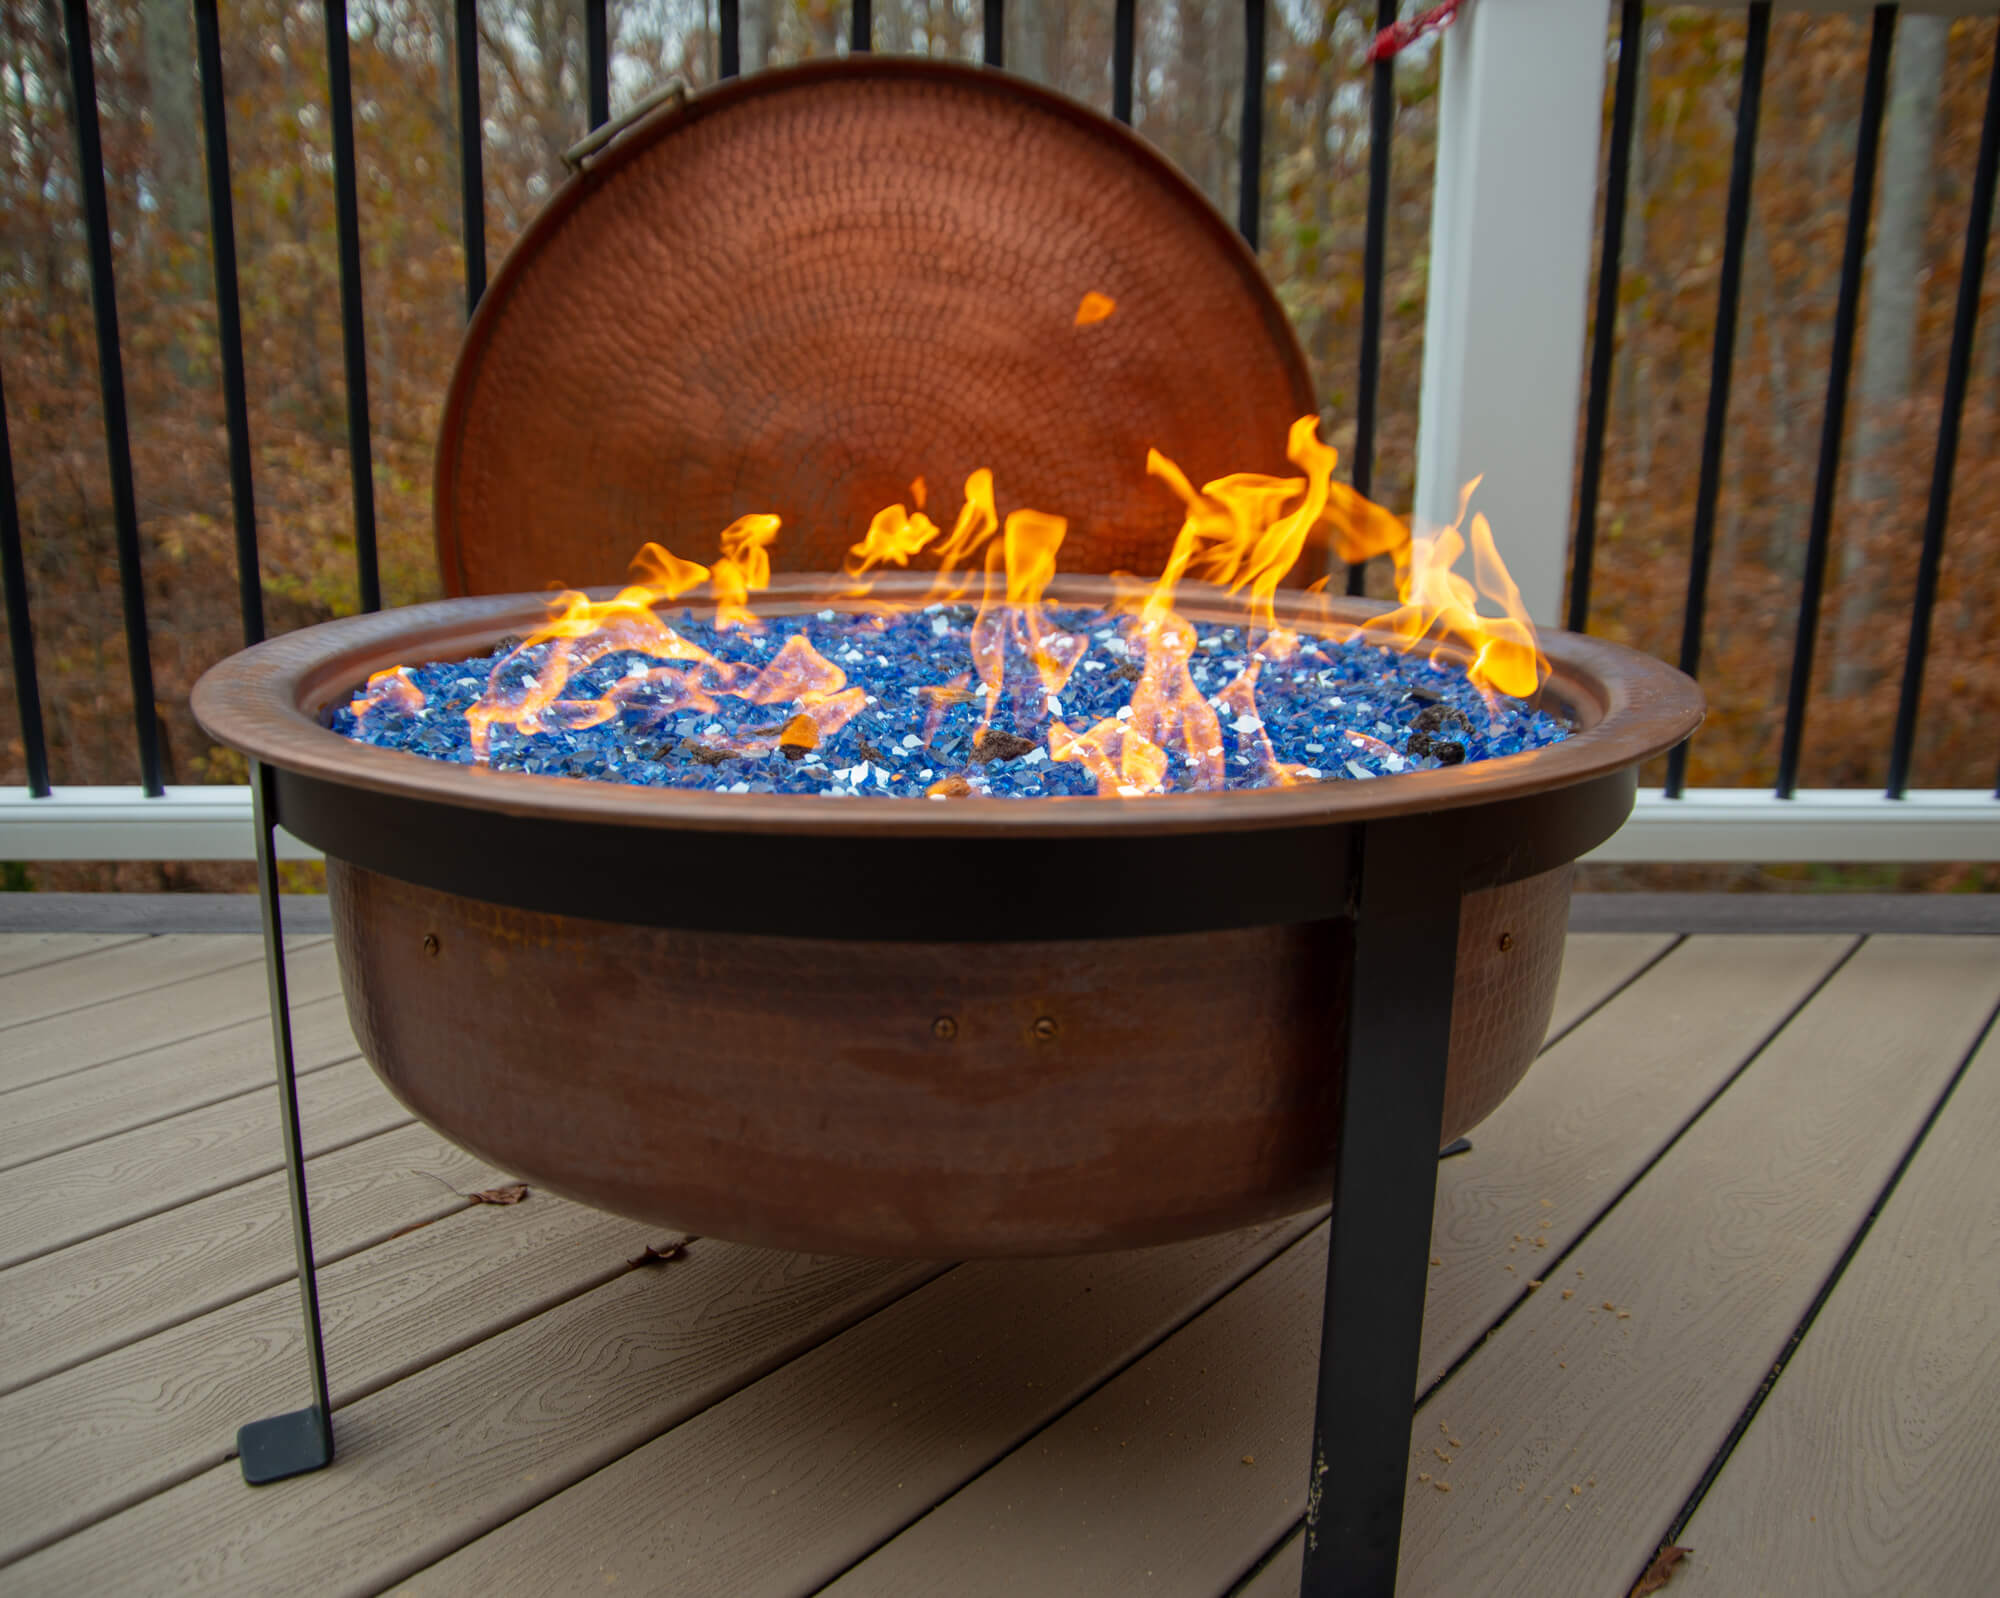 6 Ways To Put A Fire Pit On Wooden Deck, Fire Pit Table On Wood Deck